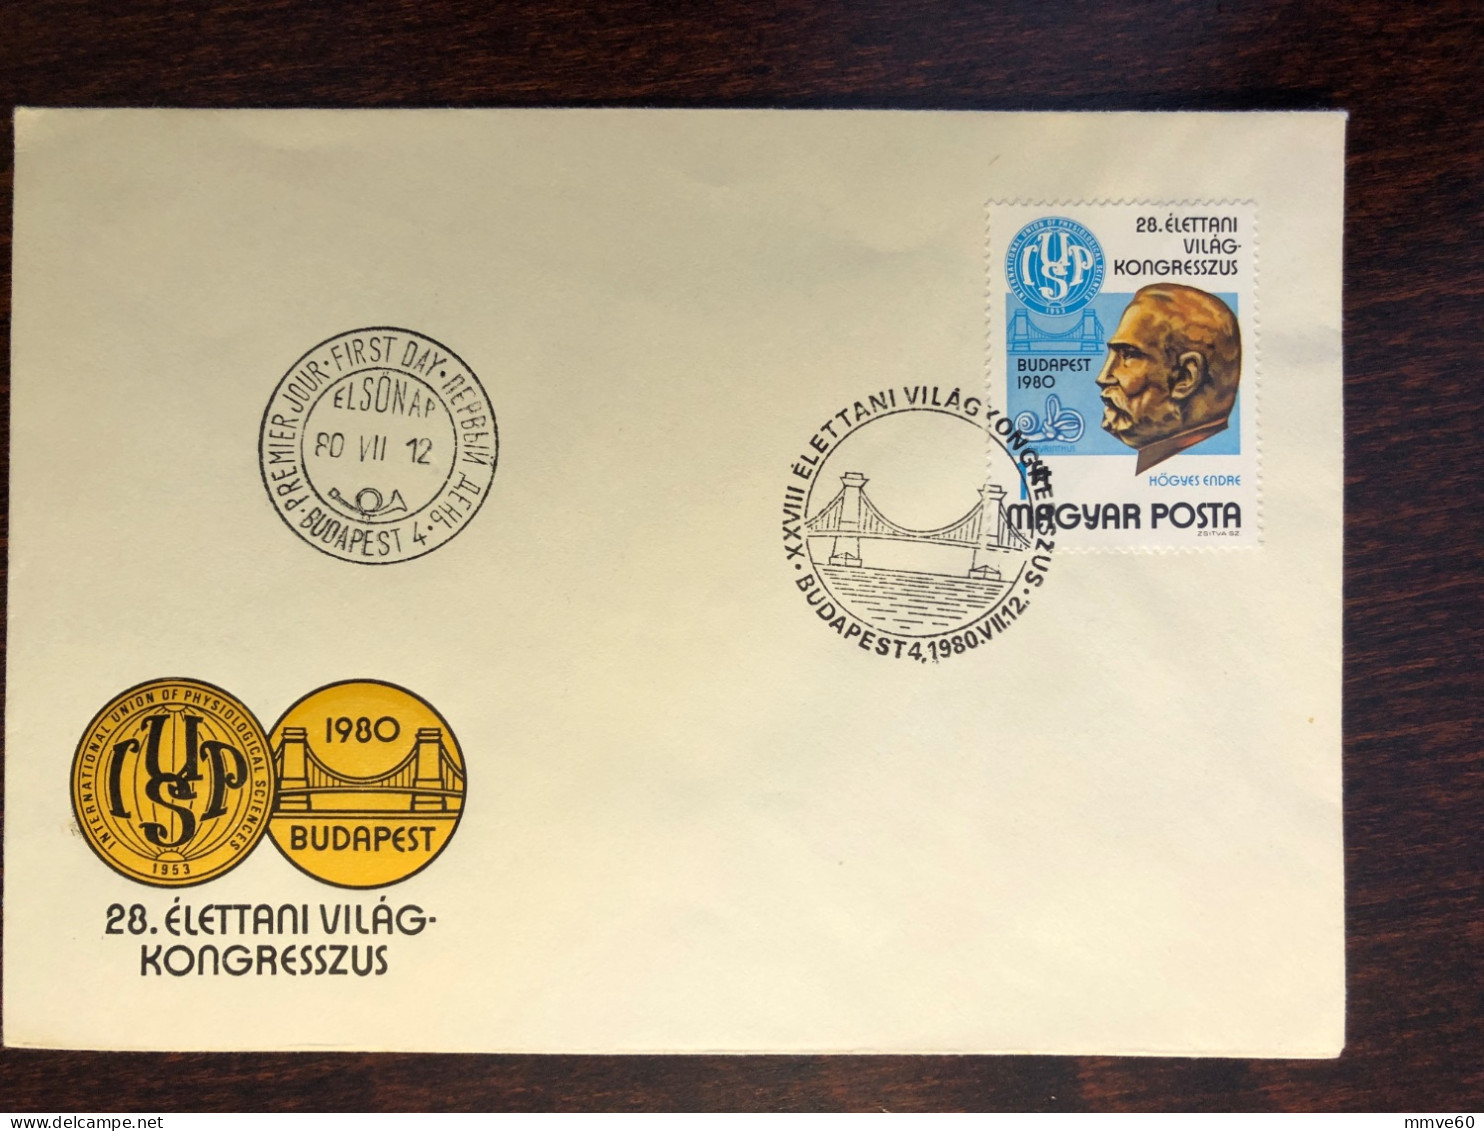 HUNGARY FDC COVER 1980 YEAR PHYSIOLOGY RABIES VACCINE HEALTH MEDICINE STAMPS - FDC